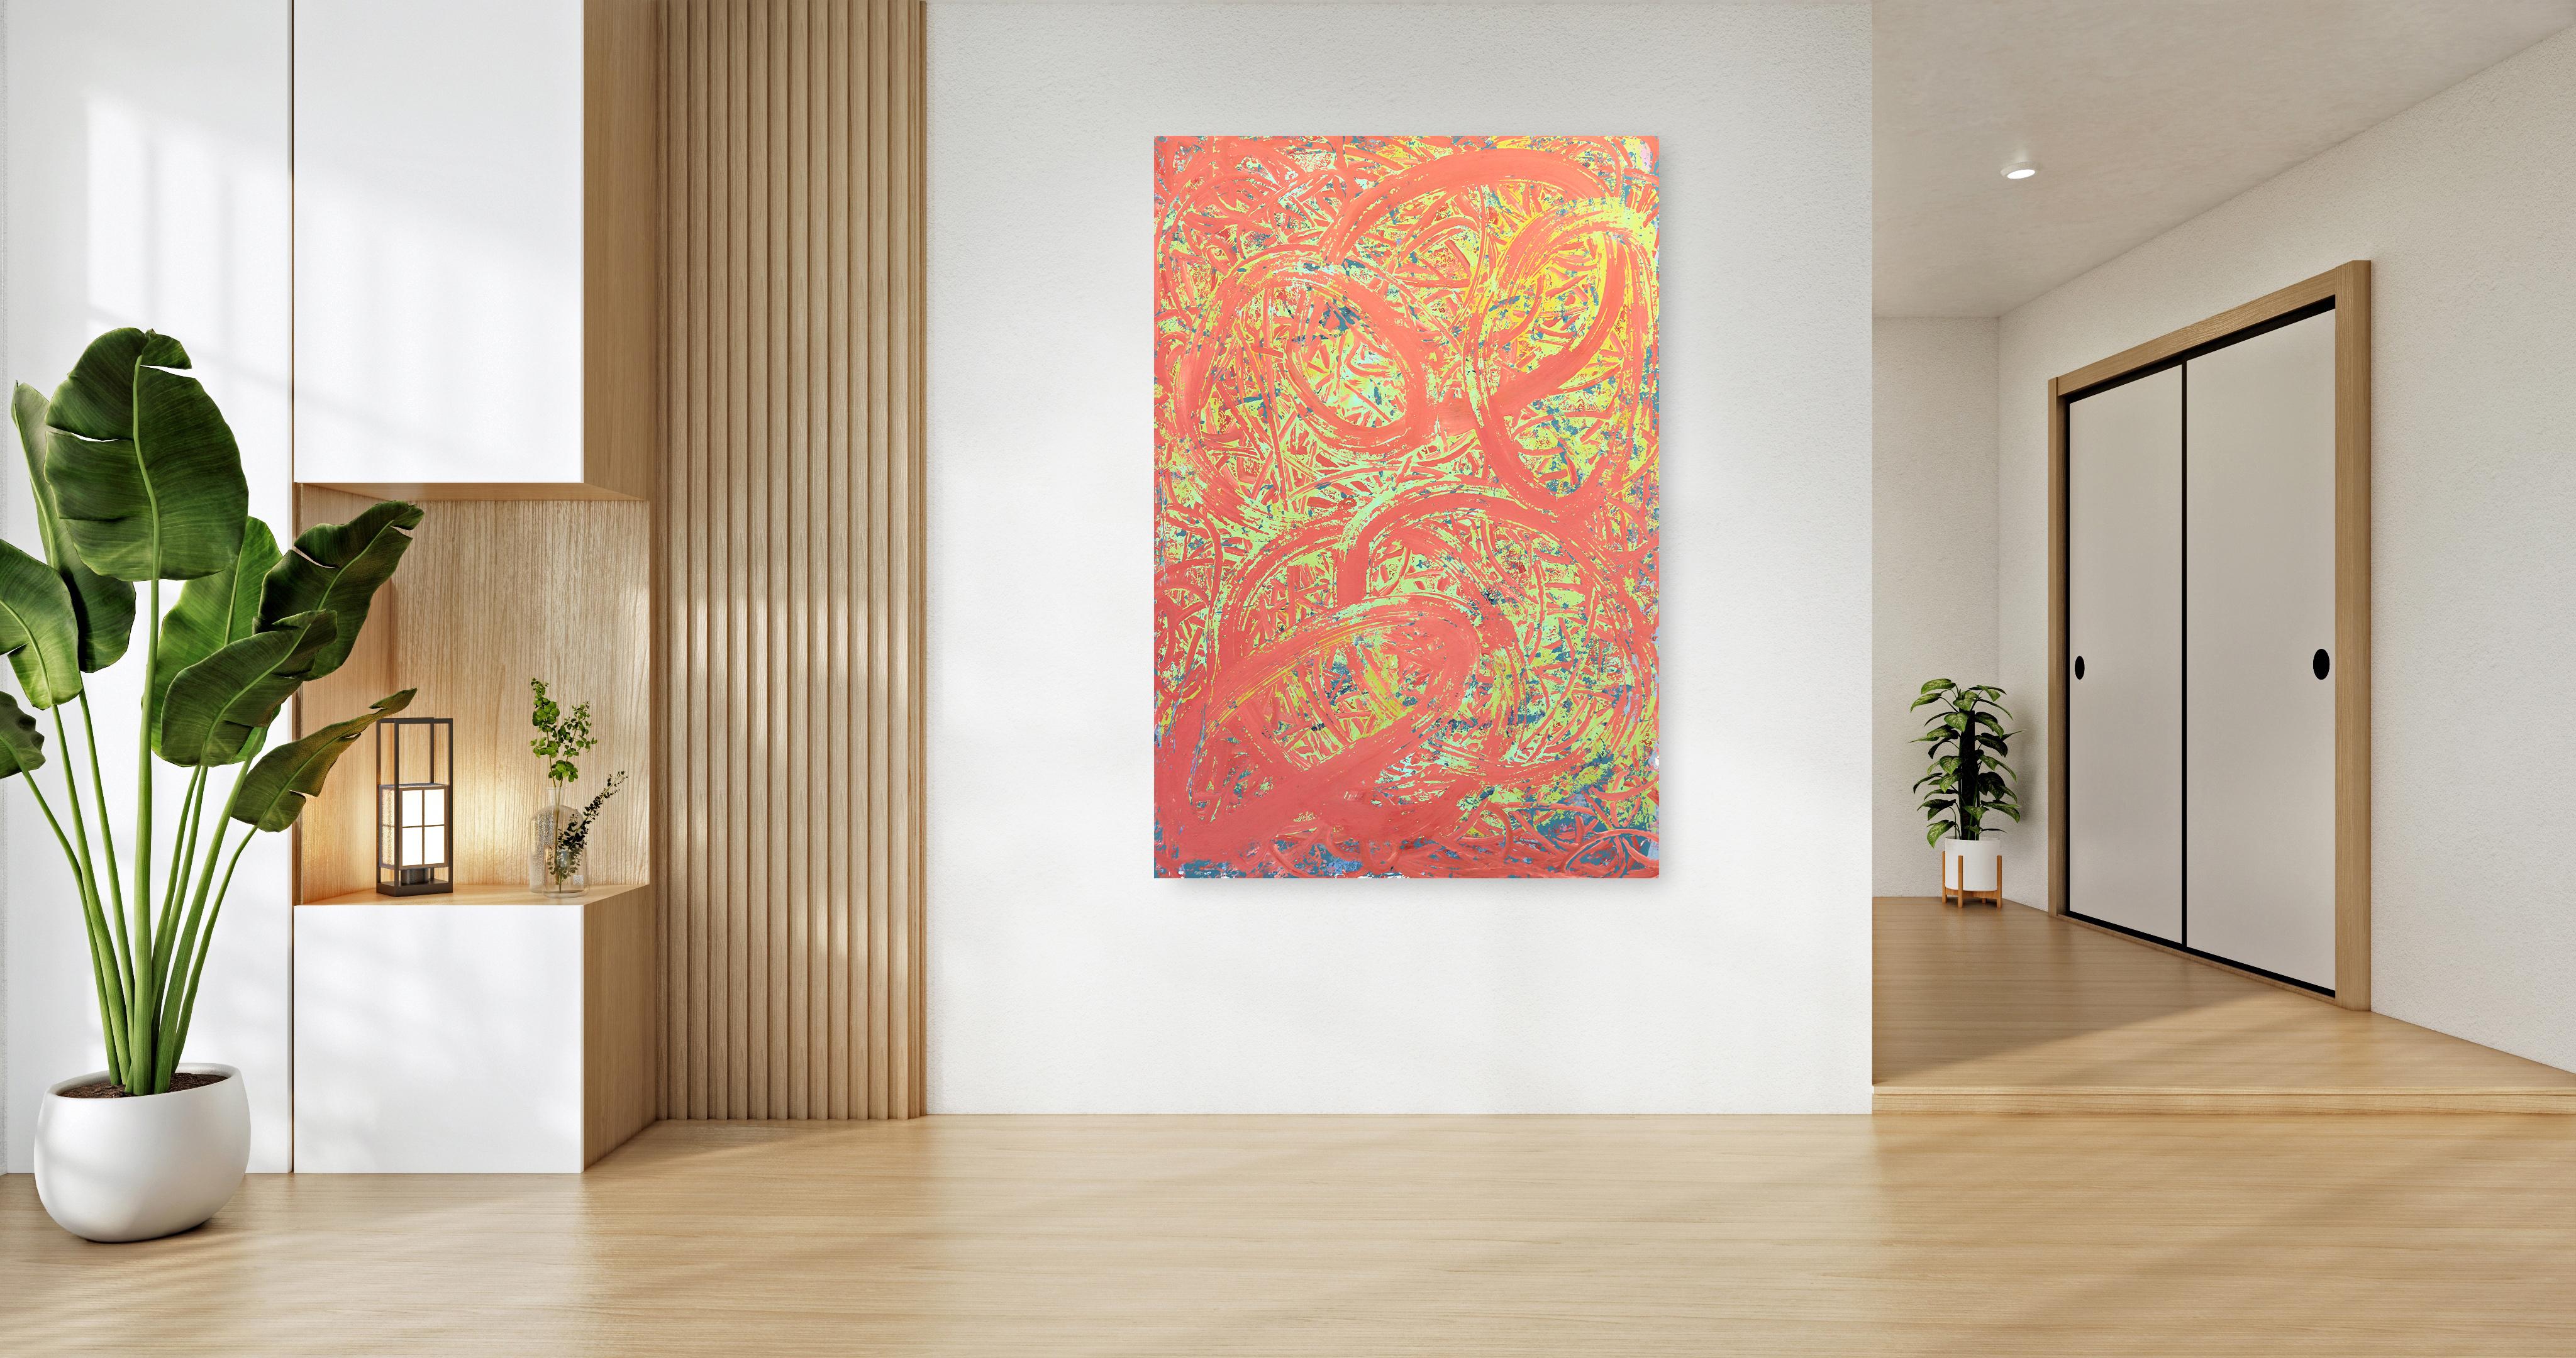 A636 - Big Canvas Art Large Colorful Original Abstract Painting For Sale 1